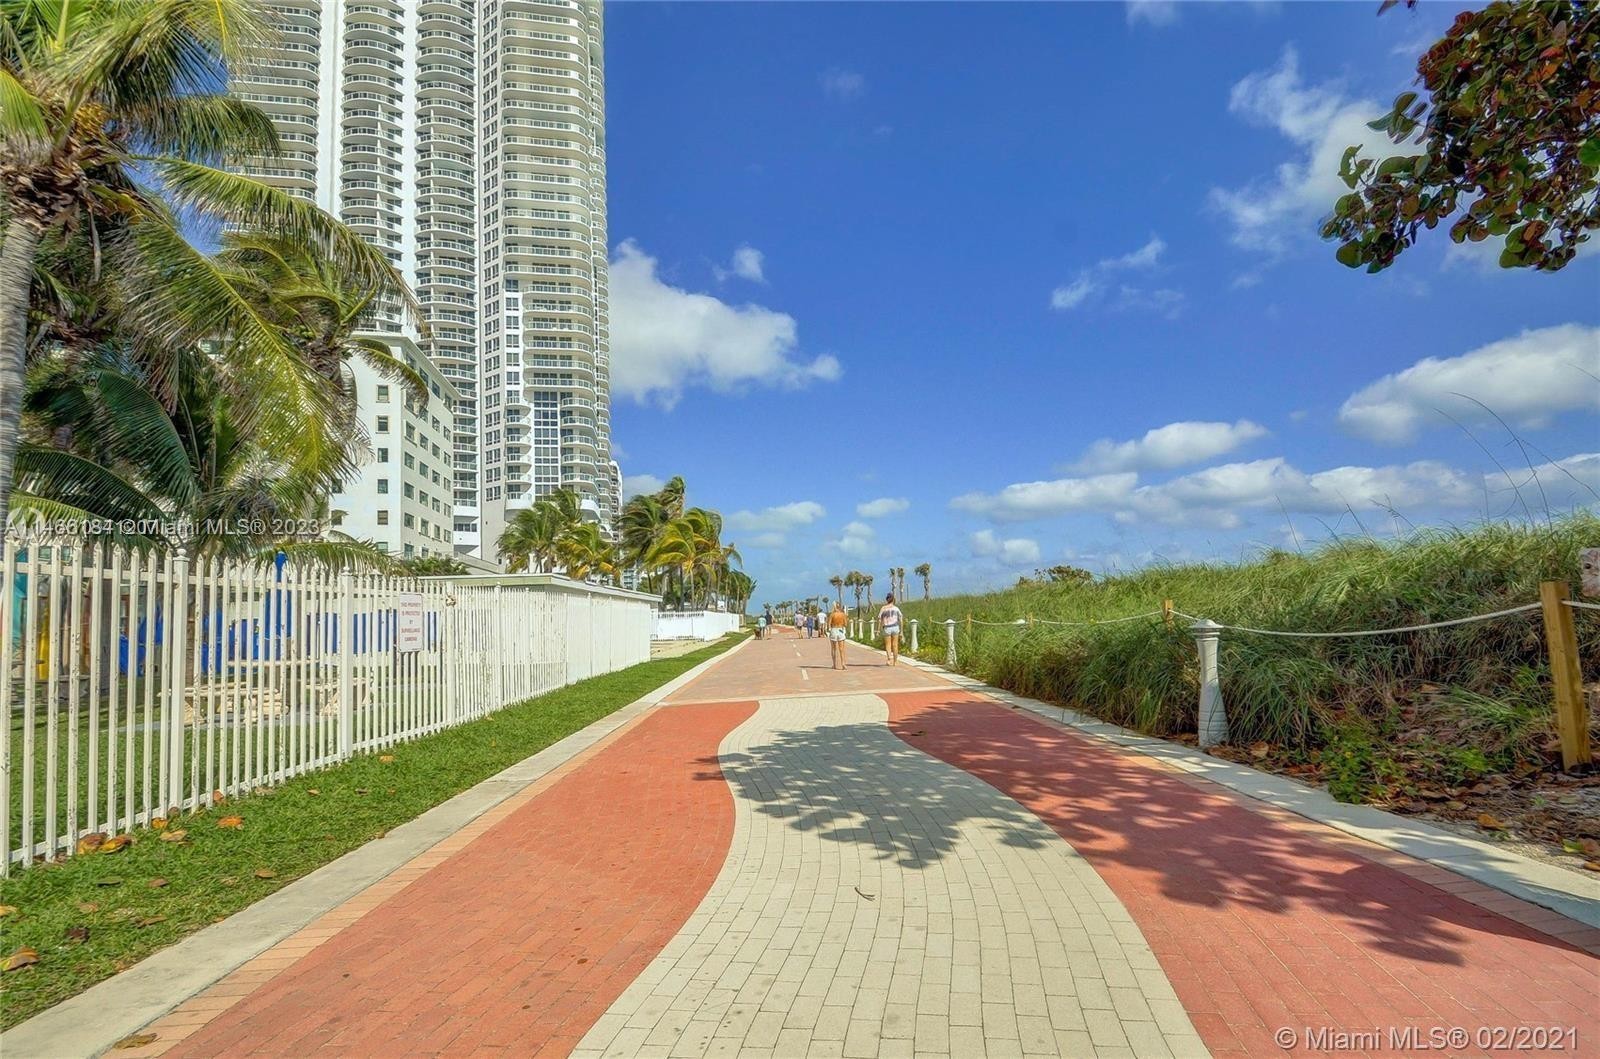 40. 6301 Collins Ave